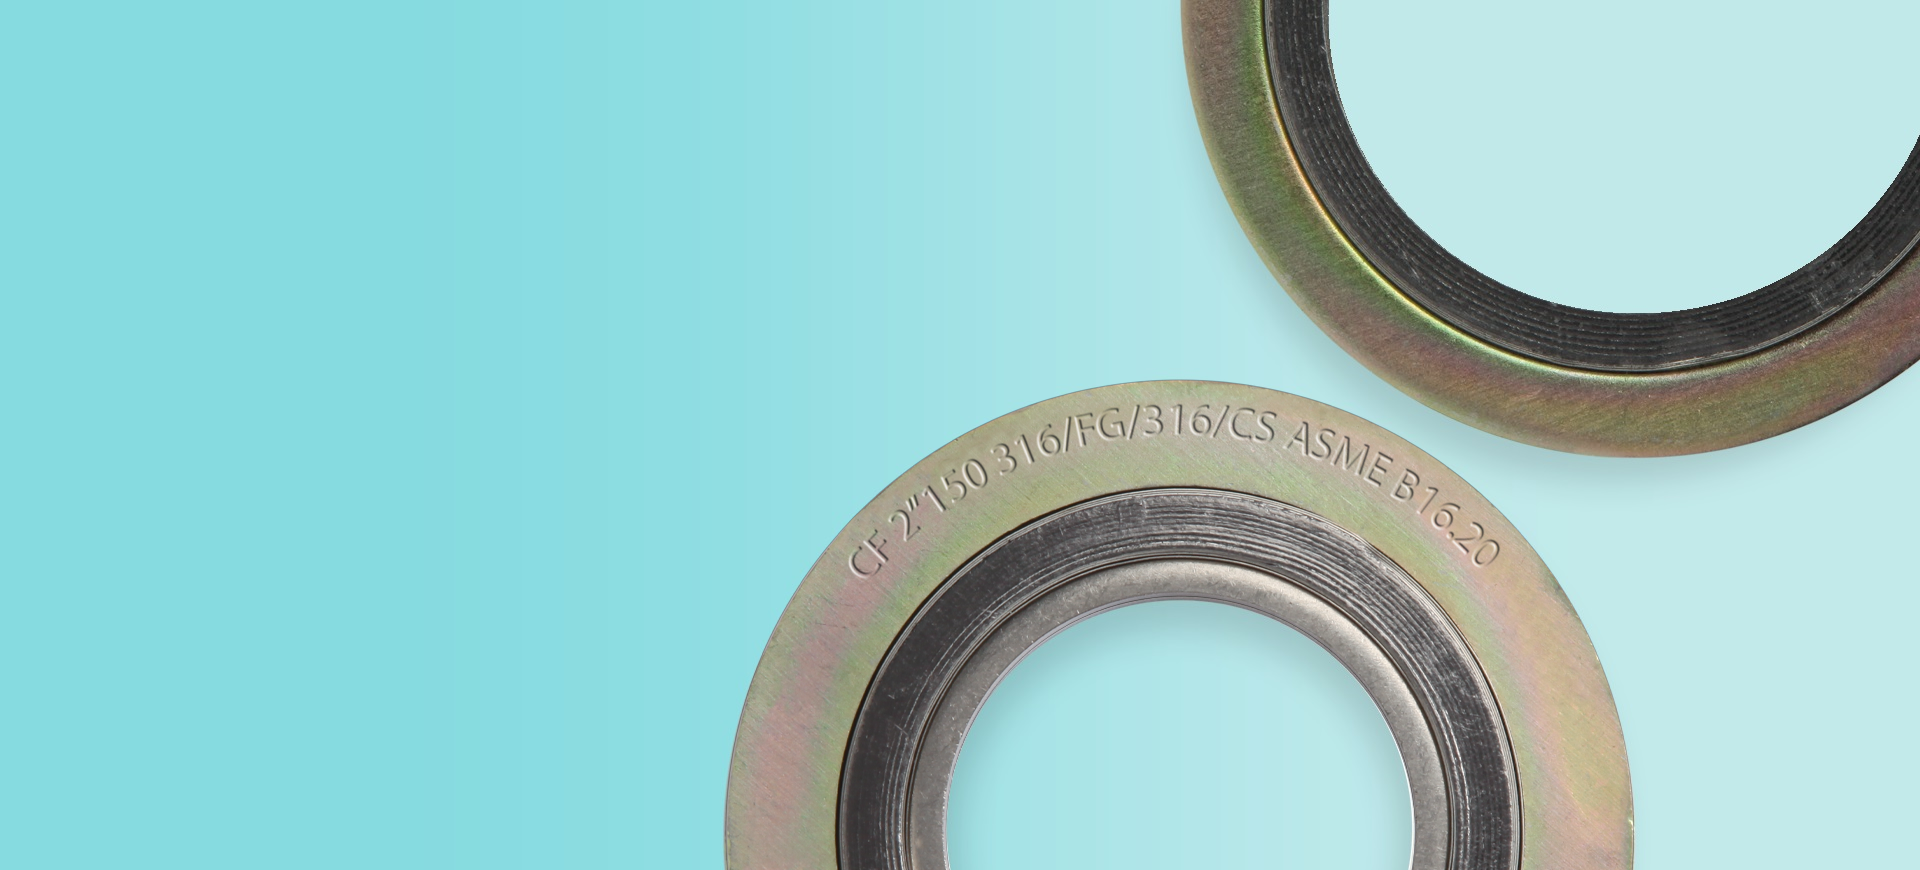 DISCOVER OUR  NEW E-SHOP FOR  SPIRAL WOUND GASKETS READY TO DELIVER IN 24H